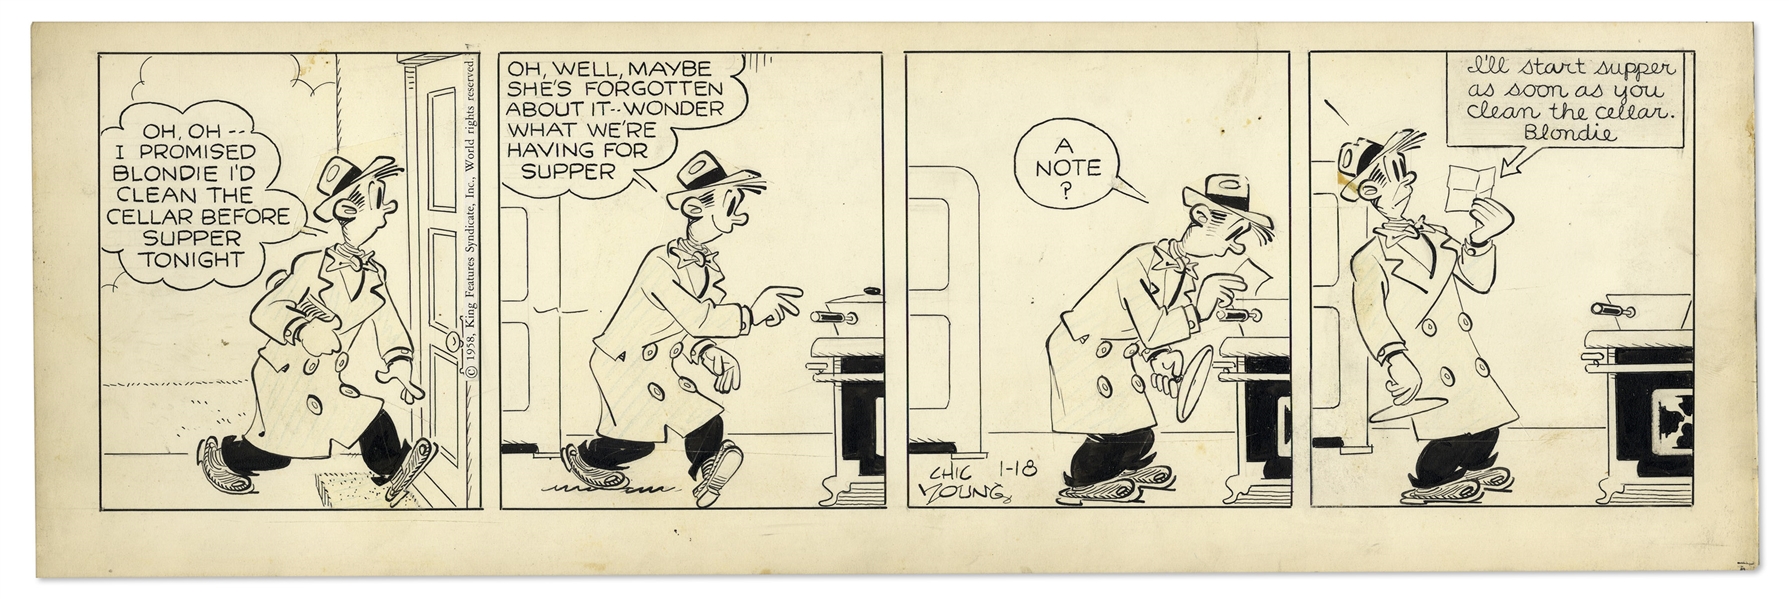 2 Chic Young Hand-Drawn ''Blondie'' Comic Strips From 1958